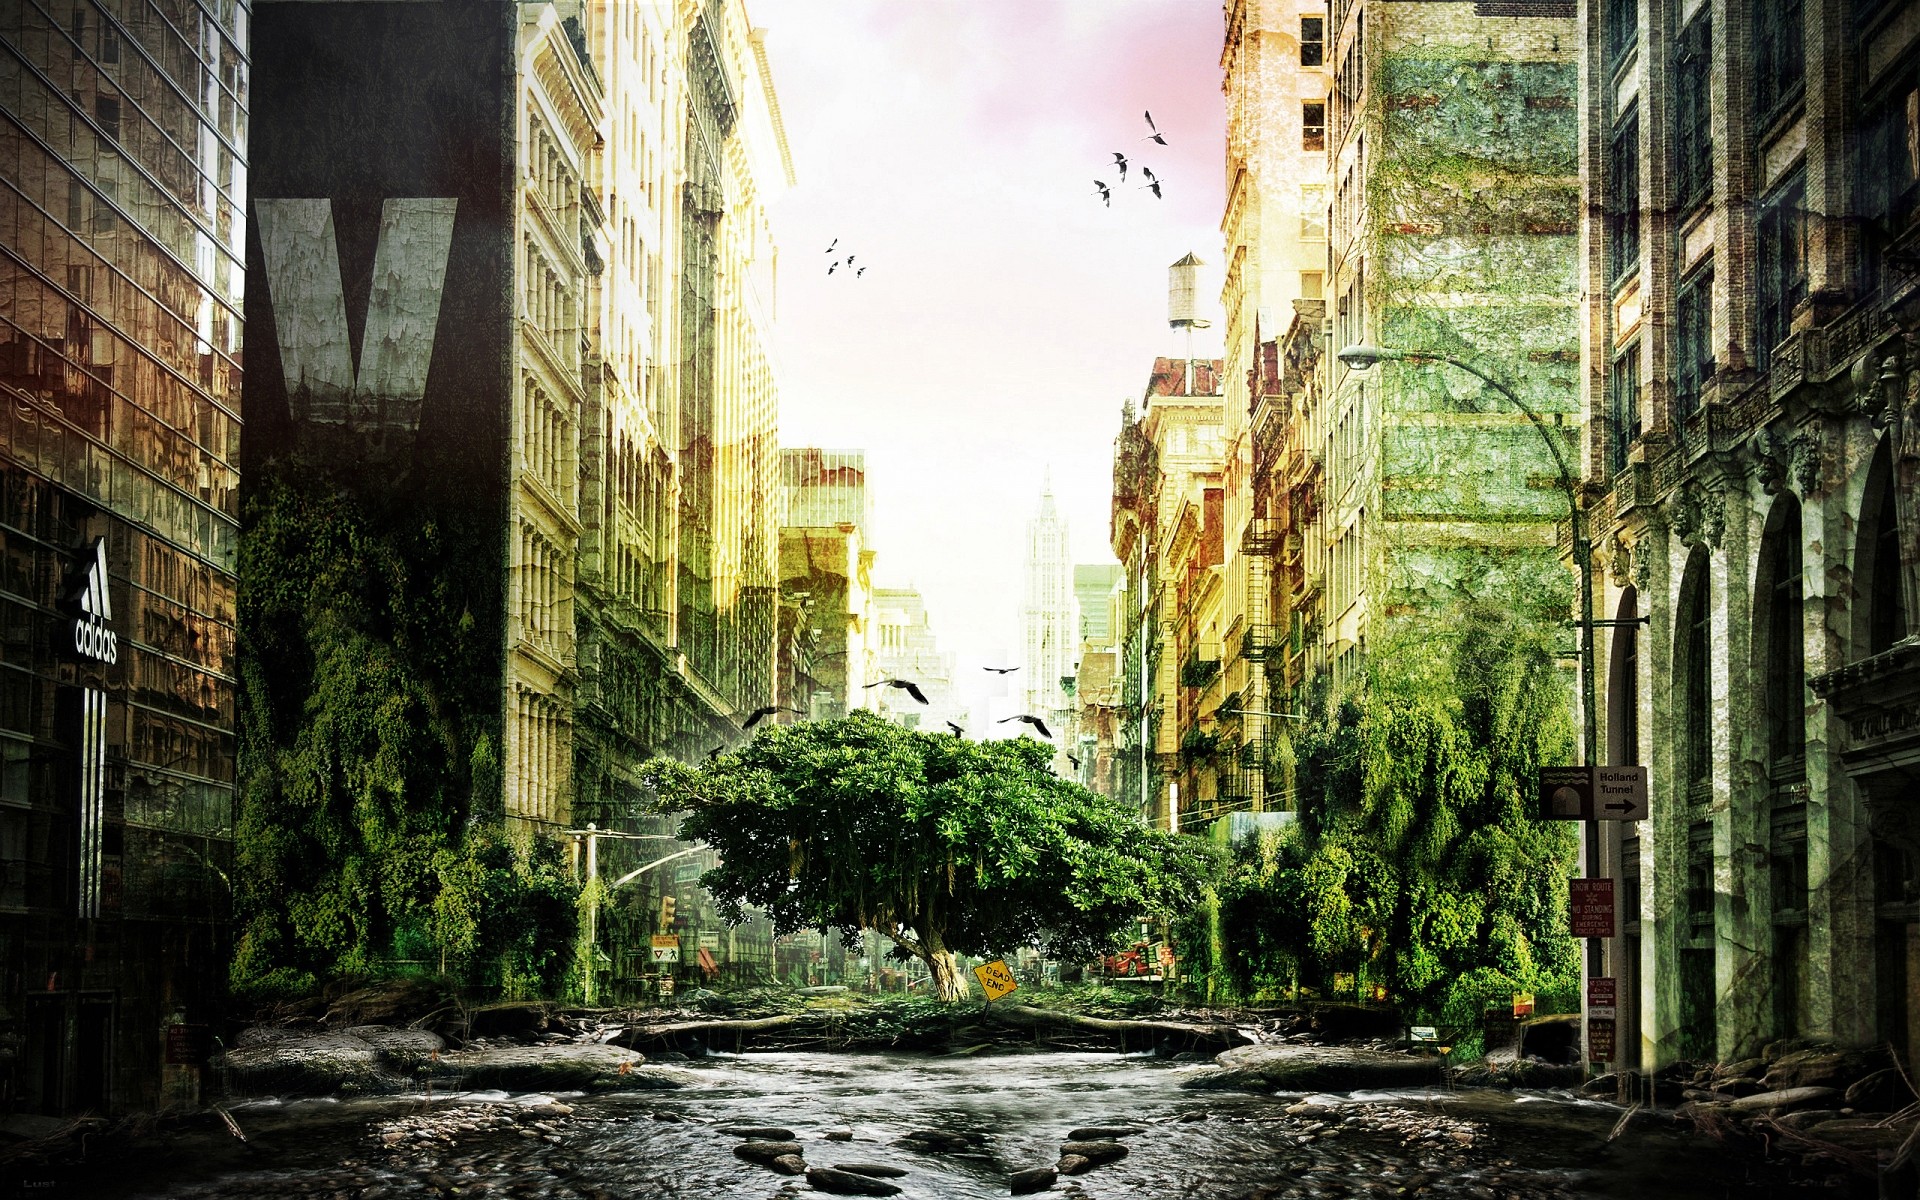 photo manipulation architecture building city old travel street window outdoors urban green tree manipulated buildings